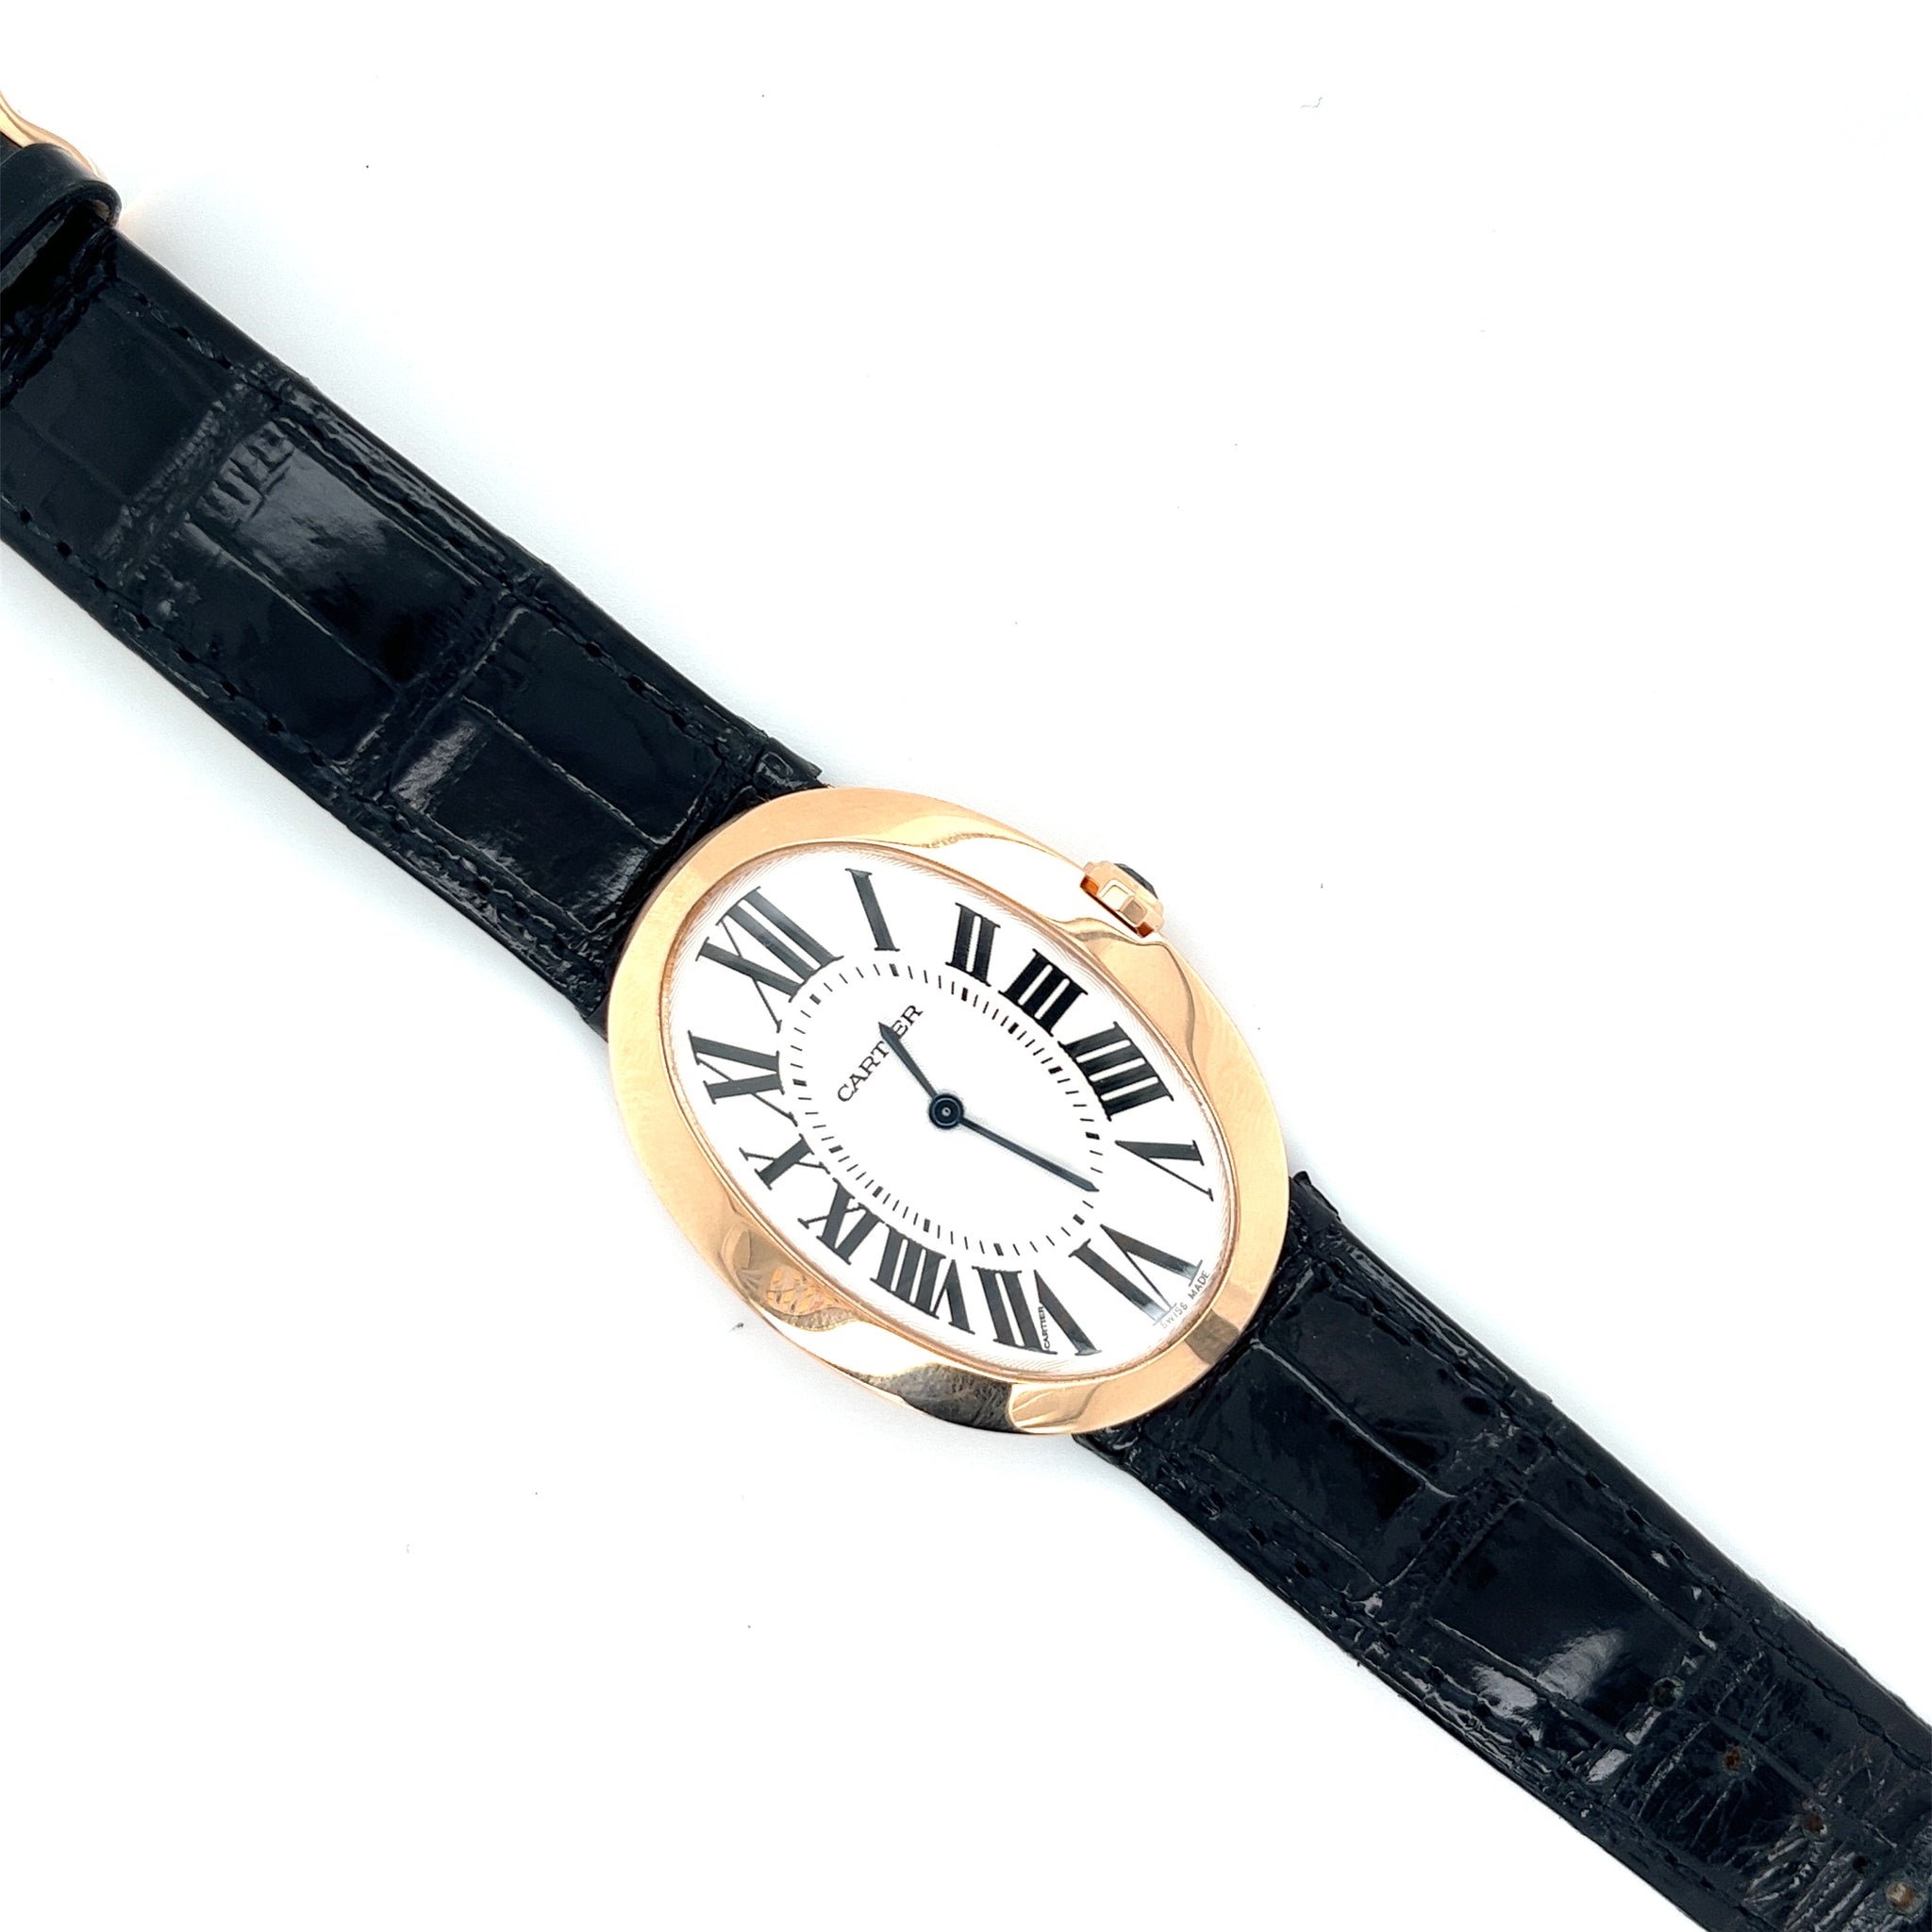 NOS Jumbo Cartier Baignoire 18kt Rose Gold Reference 3033